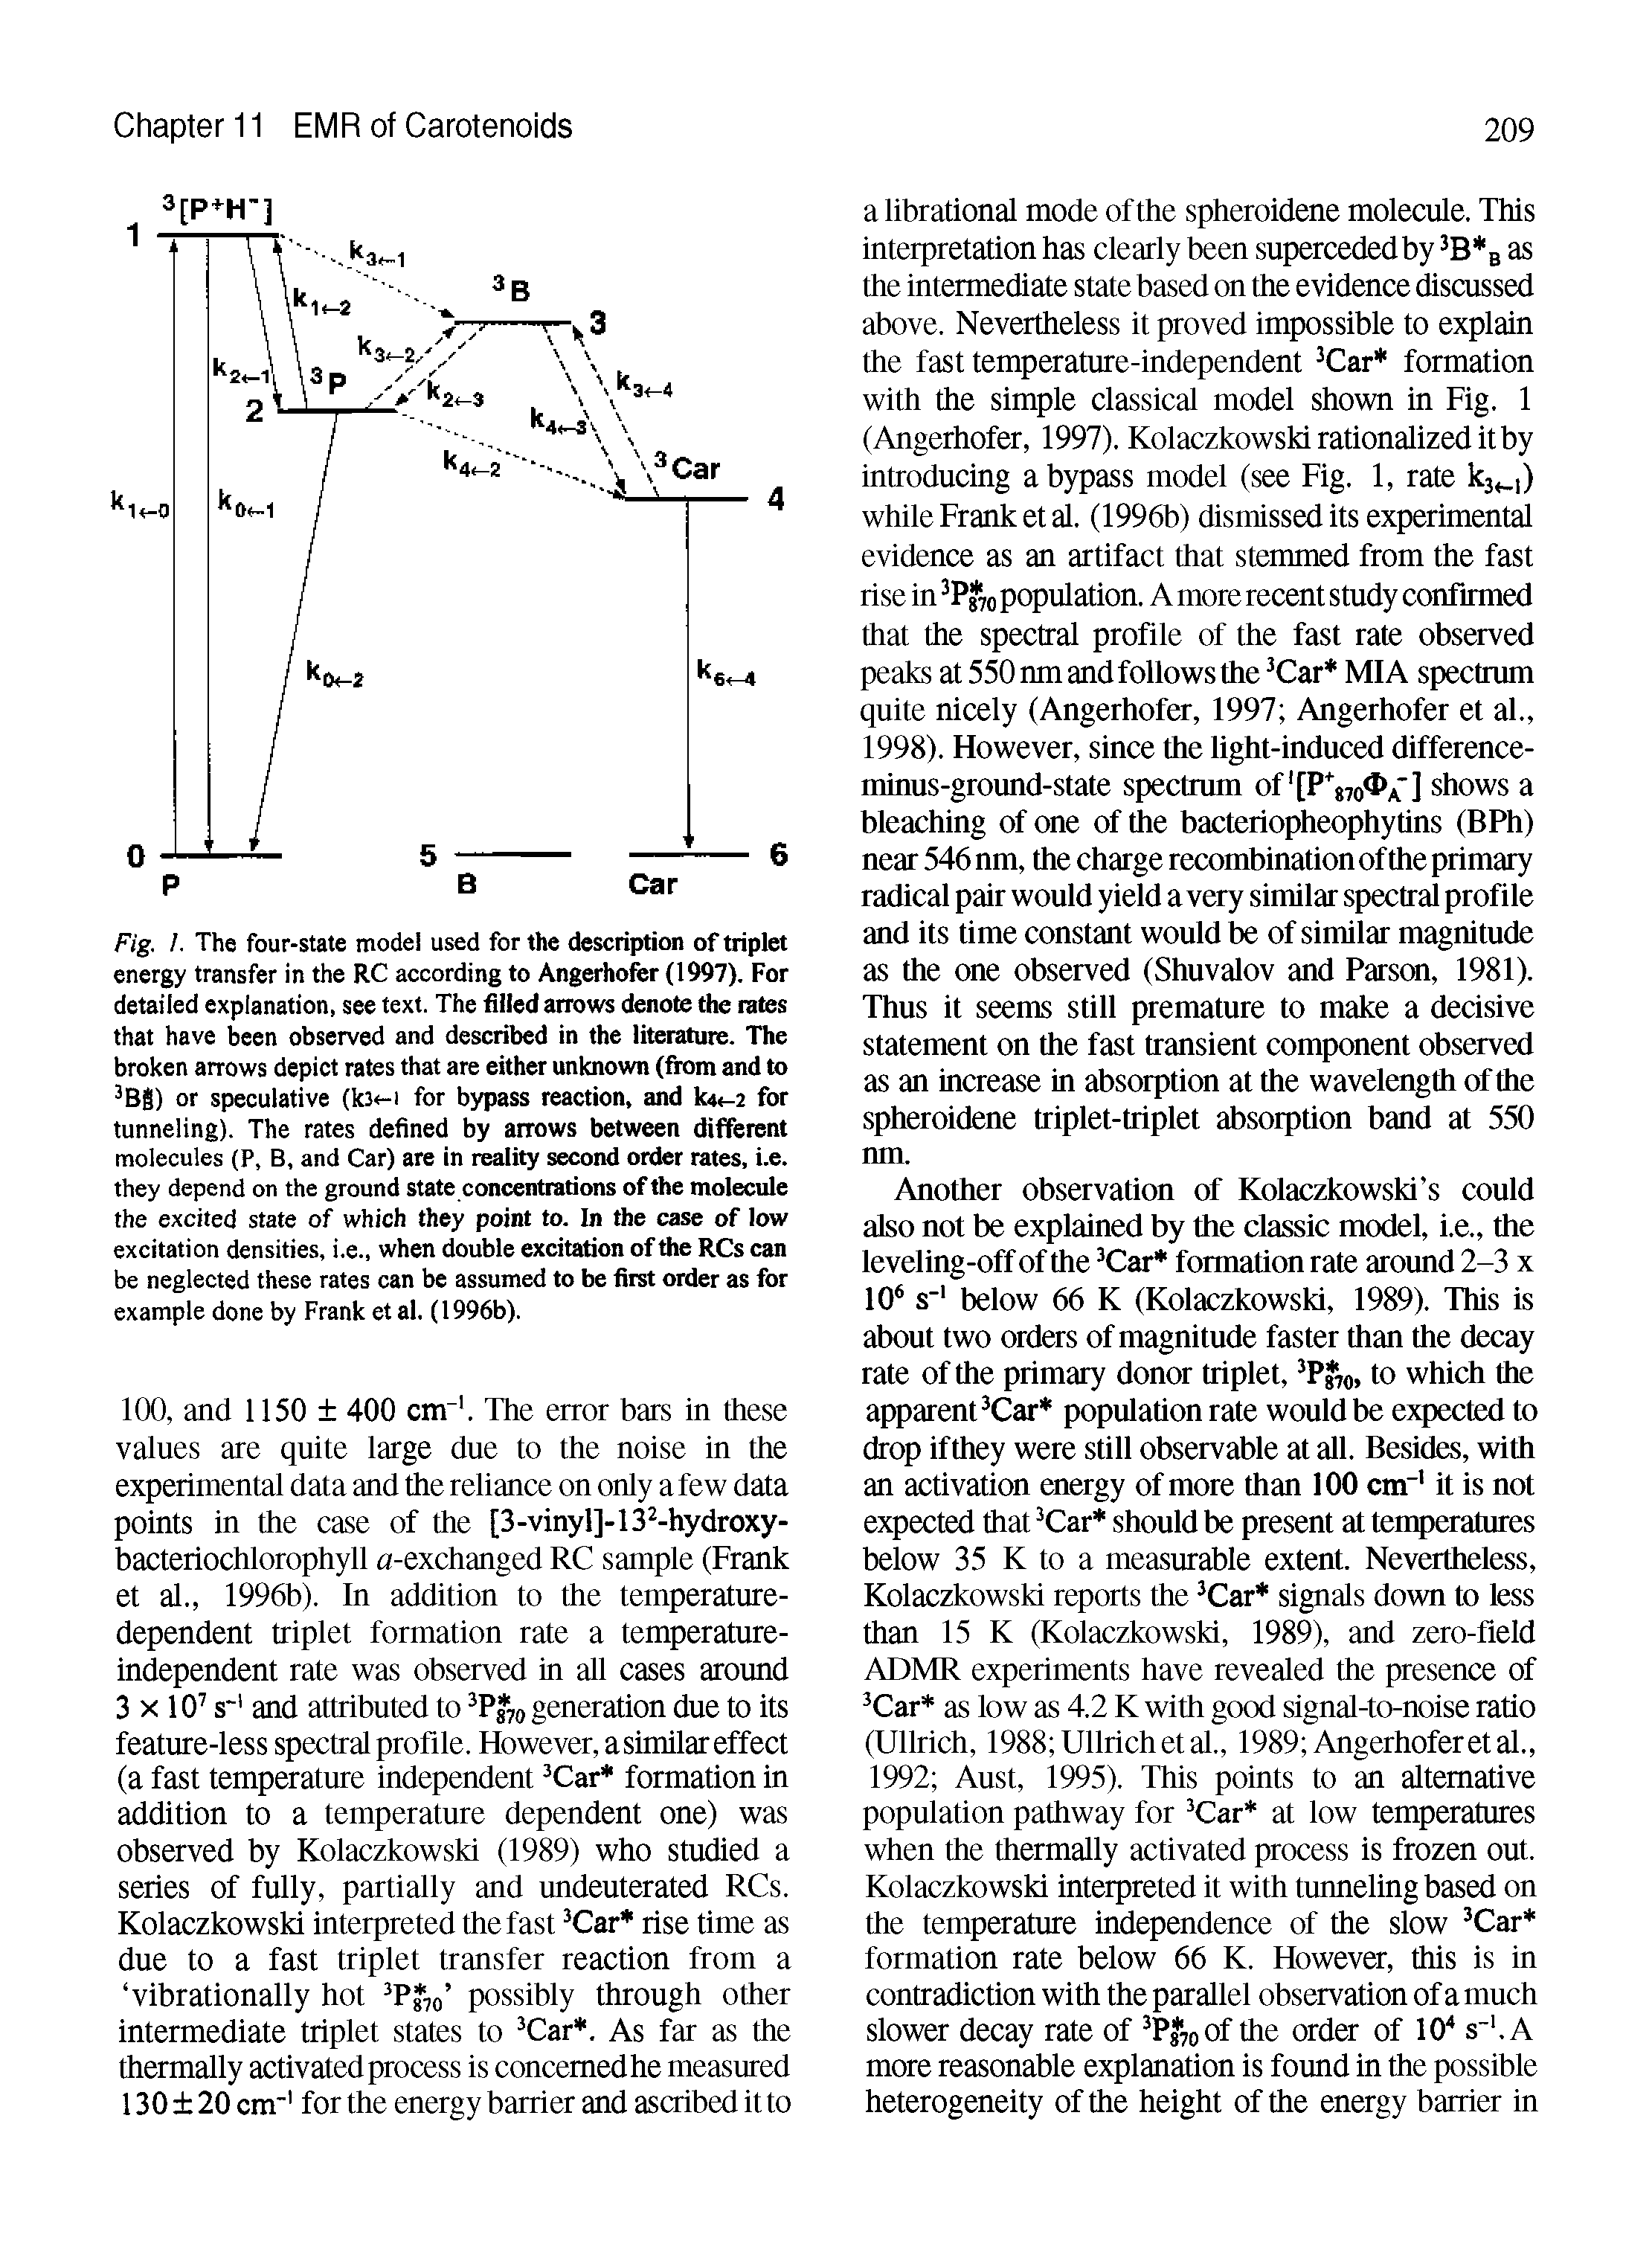 Fig. /. The four-state model used for the description of triplet energy transfer in the RC according to Angerhofer (1997). For detailed explanation, see text. The filled arrows denote the rates that have been observed and described in the literature. The broken arrows depict rates that are either unknown (from and to BS) or speculative (k3 -i for bypass reaction, and k4 -2 for tunneling). The rates defined by arrows between different molecules (P, B, and Car) are in reality second order rates, i.e. they depend on the ground state concentrations of the molecule the excited state of which they point to. In the case of low excitation densities, i.e., when double excitation of the RCs can be neglected these rates can be assumed to be first order as for example done by Frank et al. (1996b).